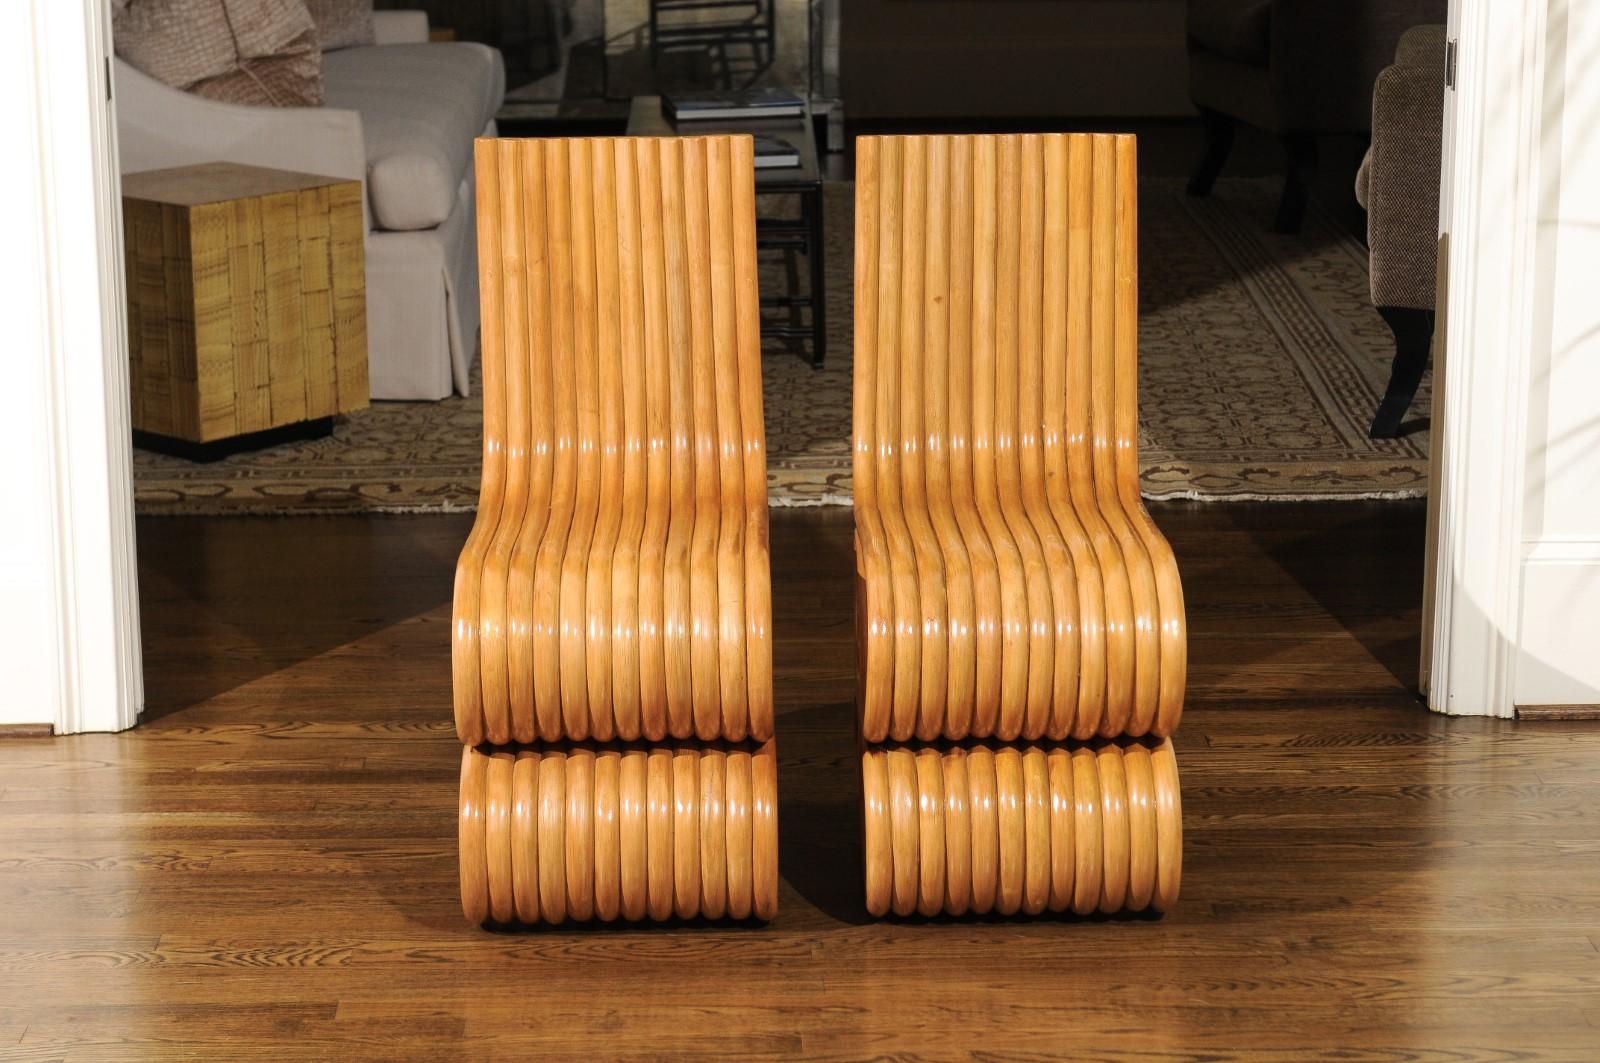 A unique set of ten (10) stunning custom made dining chairs, circa 1995. This particular rattan design was undoubtedly inspired by the groundbreaking Frank Gehry Wiggle chair series of the early 1970s. This fabulous set was custom commissioned for